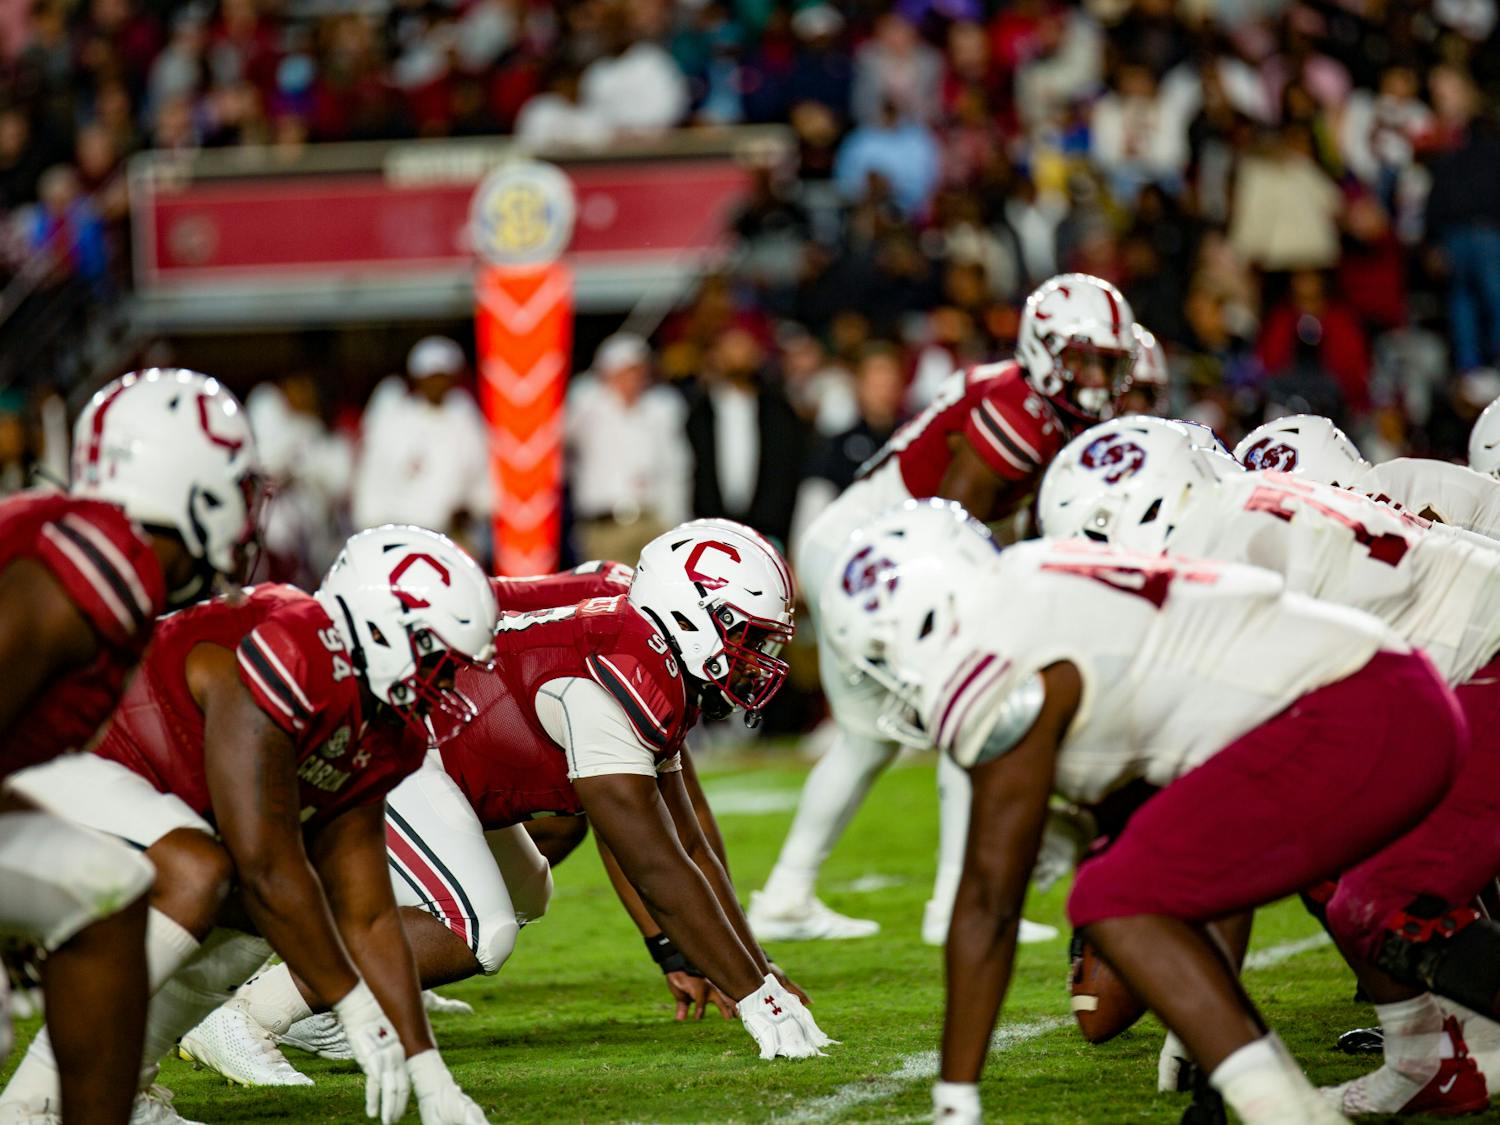 The Gamecocks line up during a play in the second half of their game against the S.C. State Bulldogs on Sept. 29, 2022. The Gamecocks defeated S.C. State 50-10.